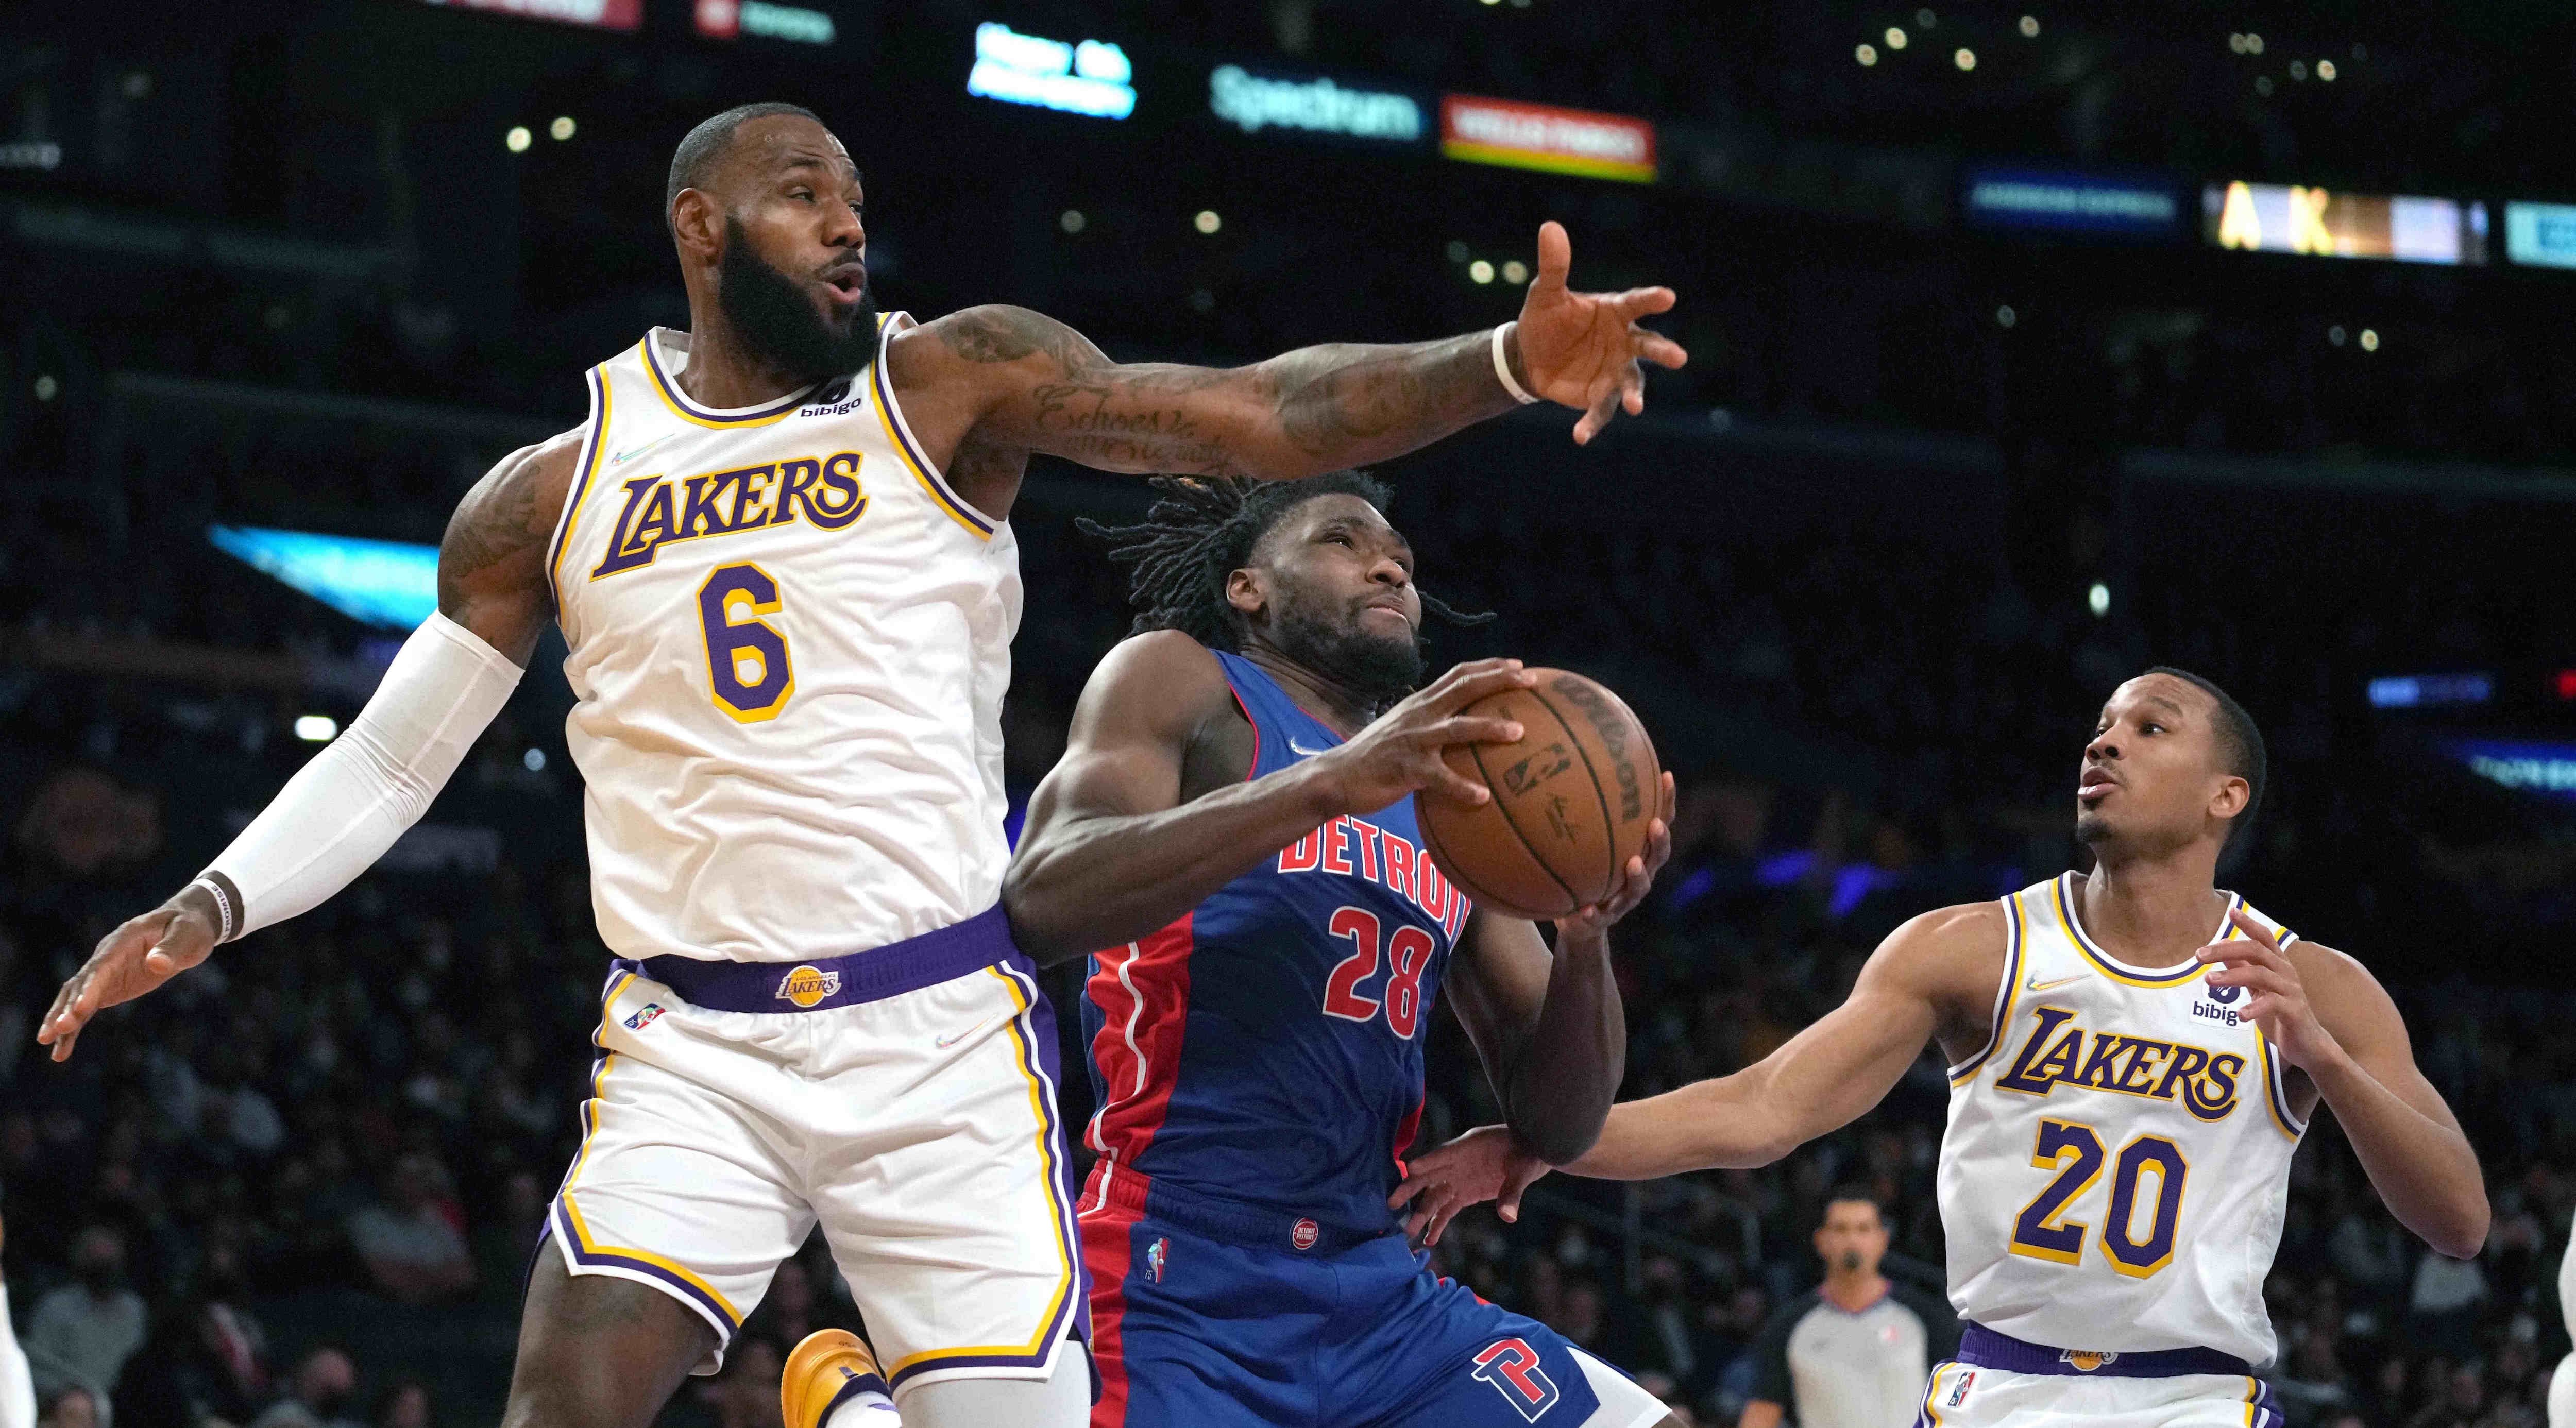 LeBron stars as Lakers repeat over Pistons